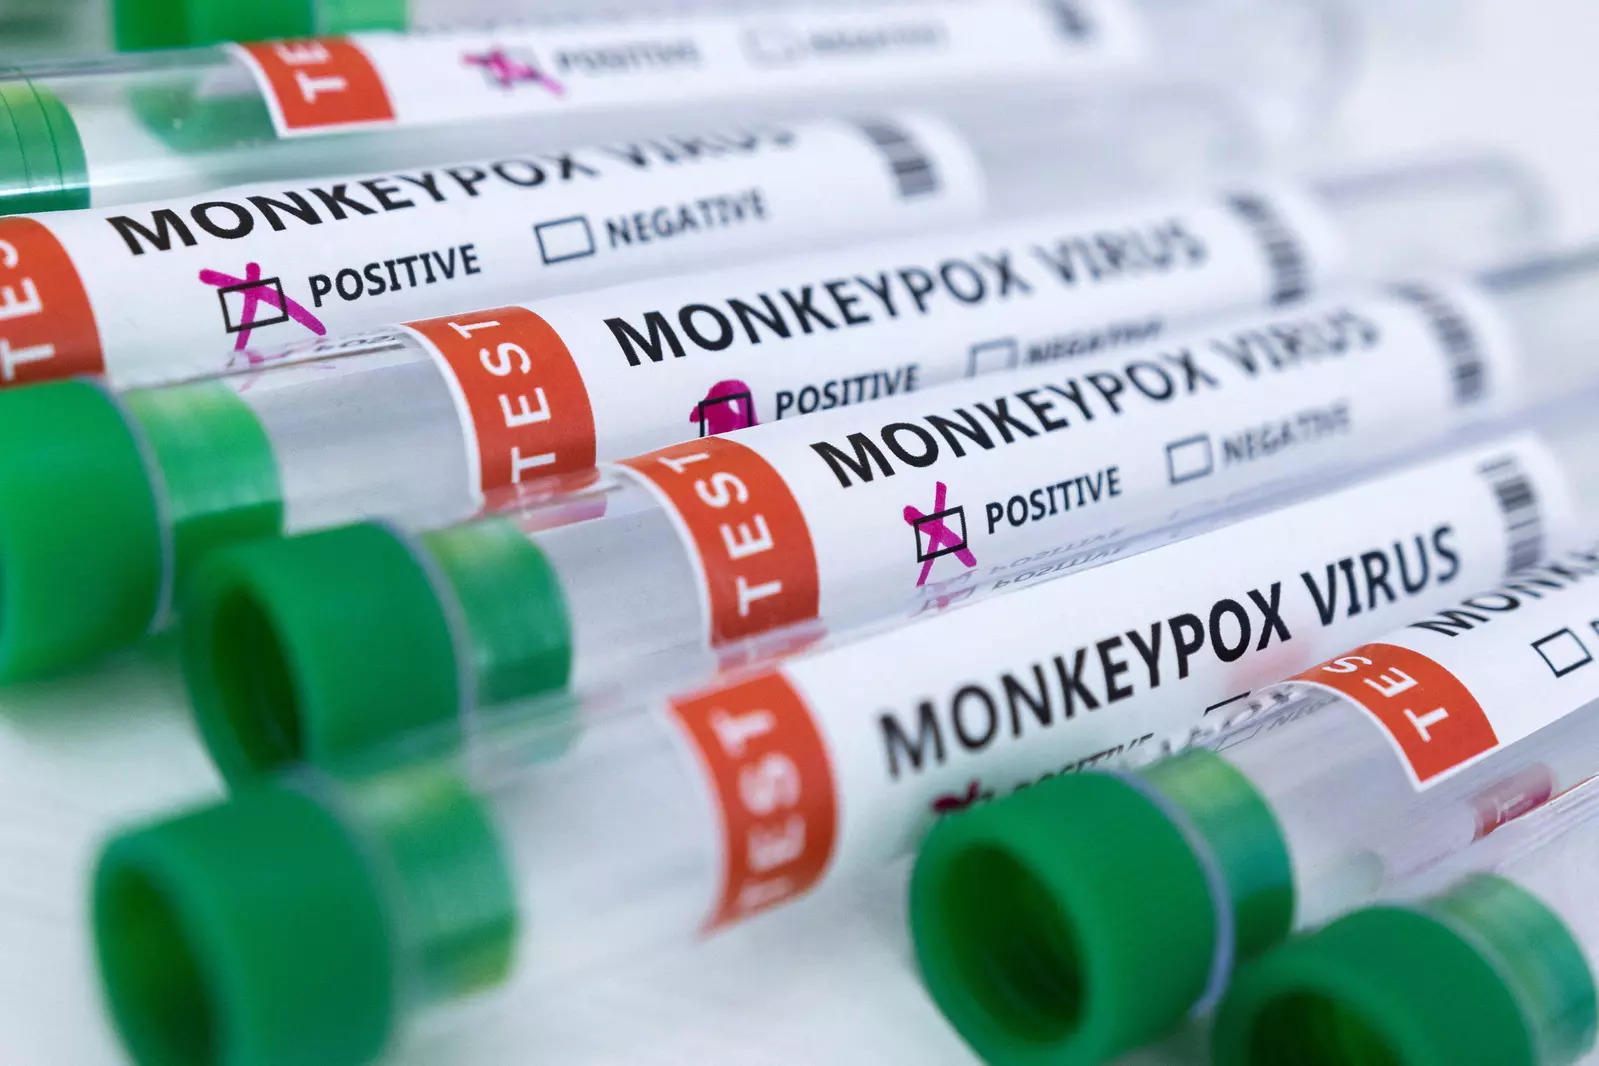 Health Ministry issues ‘Guidelines on Management of Monkeypox Disease’